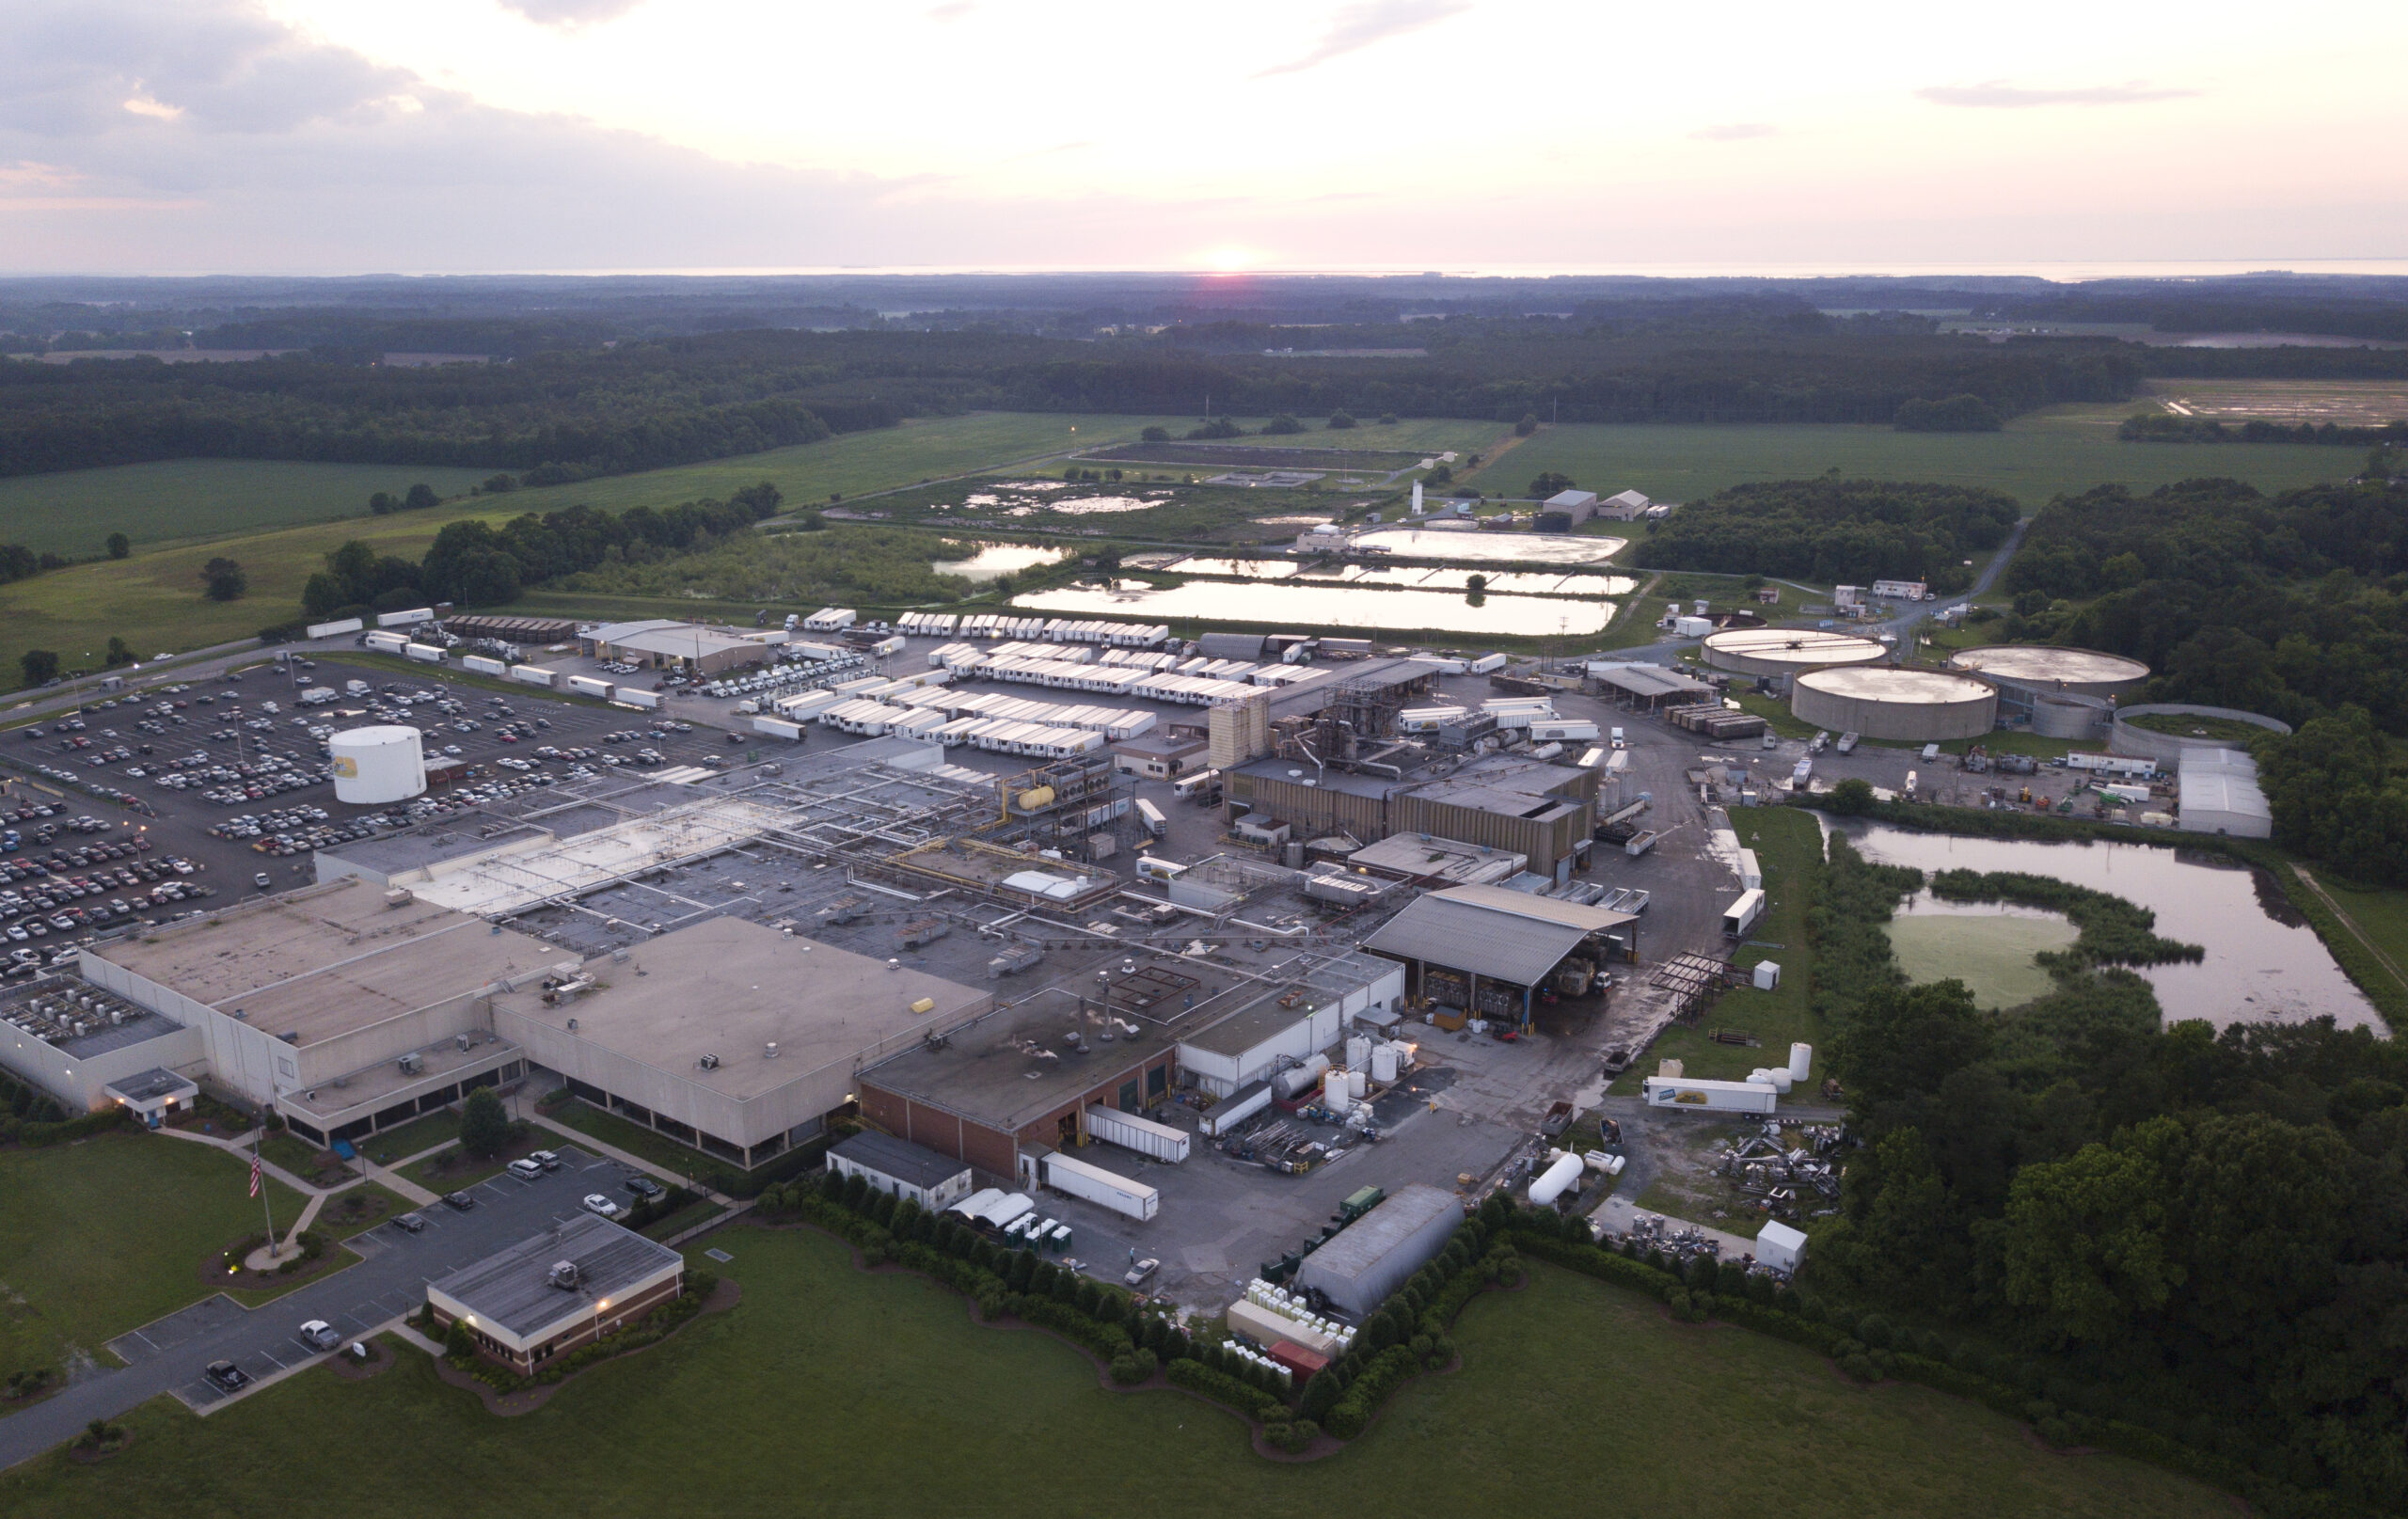 This aerial images shows the Purdue chicken processing facility in Accomack, Va., Monday, June 4, 2018. (Steve Helber/AP Photo)